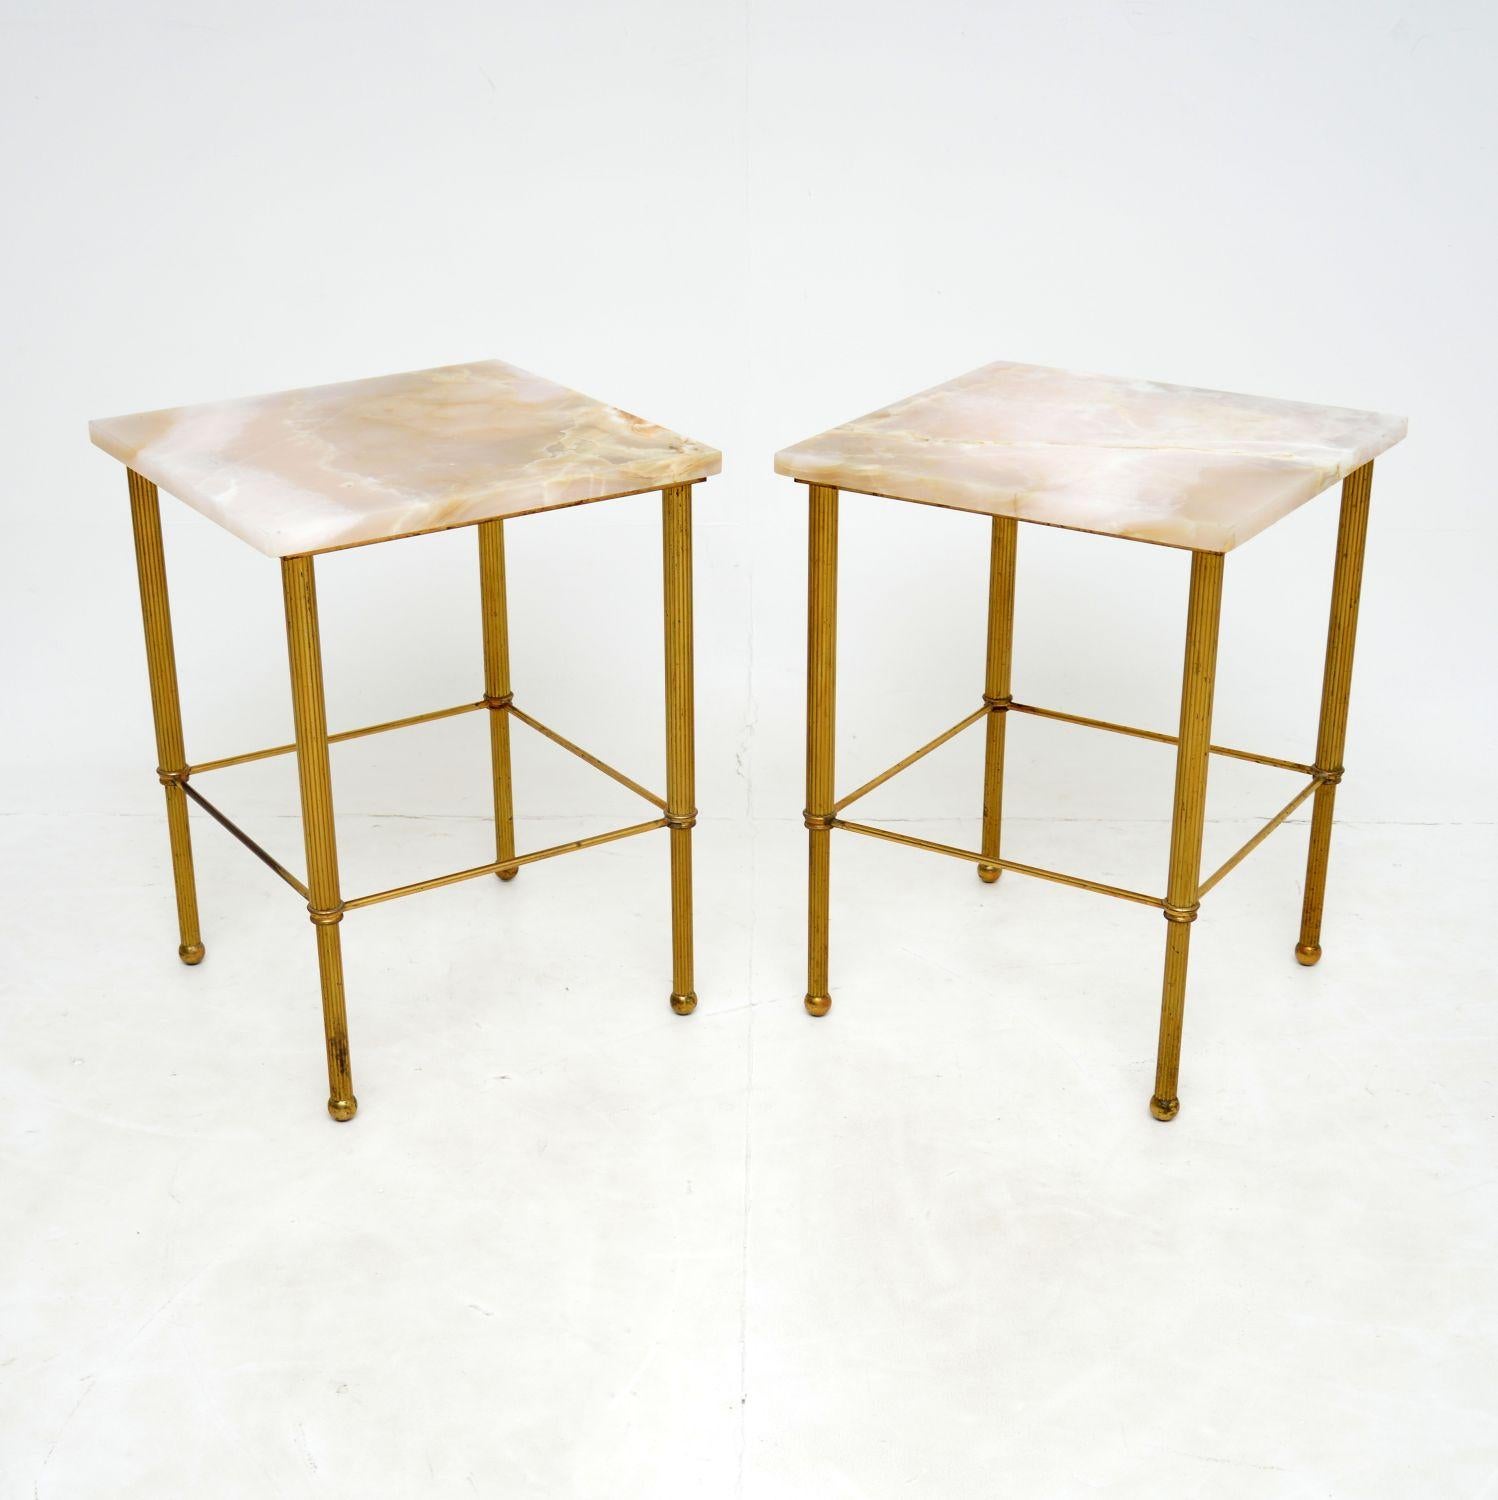 An excellent pair of vintage side tables in solid brass with fixed marble tops. These were likely made in France or Italy, they date from around the 1950-1960’s.

They are beautifully designed and are of superb quality. The brass frames have